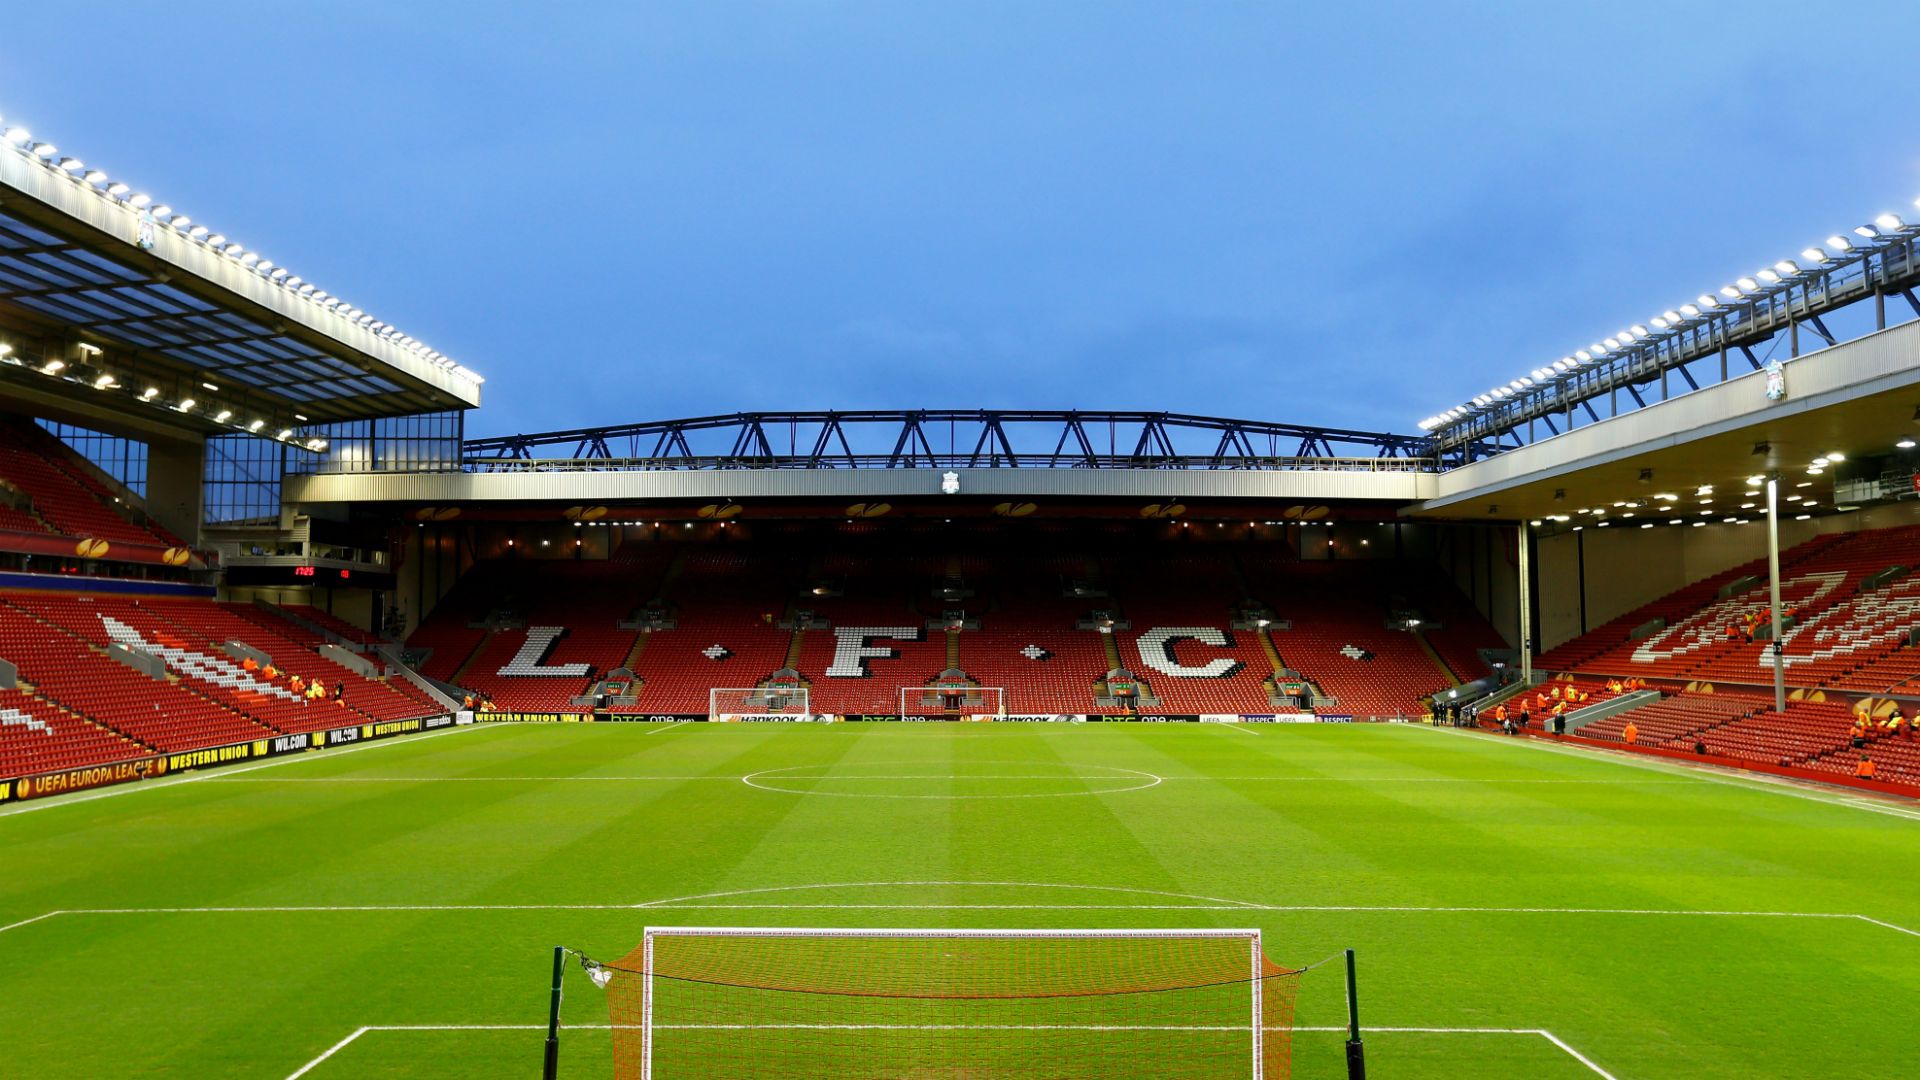  Liverpool  FC s Anfield Stadium HD Wallpapers  for PC Free 